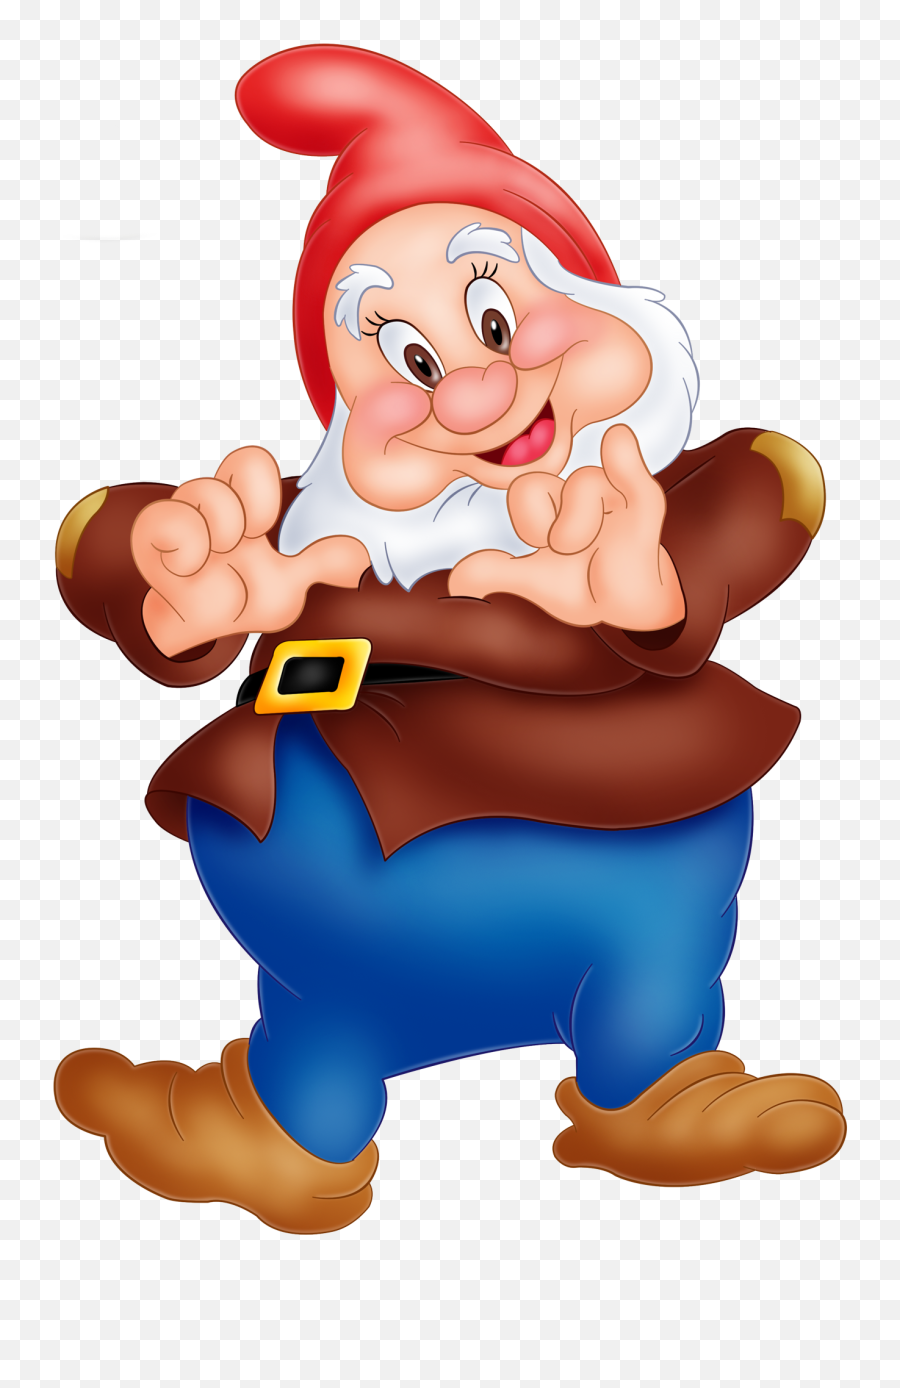 Download Dwarf Png Image For Free - Dopey Snow White And The Seven Dwarfs,Midget Png